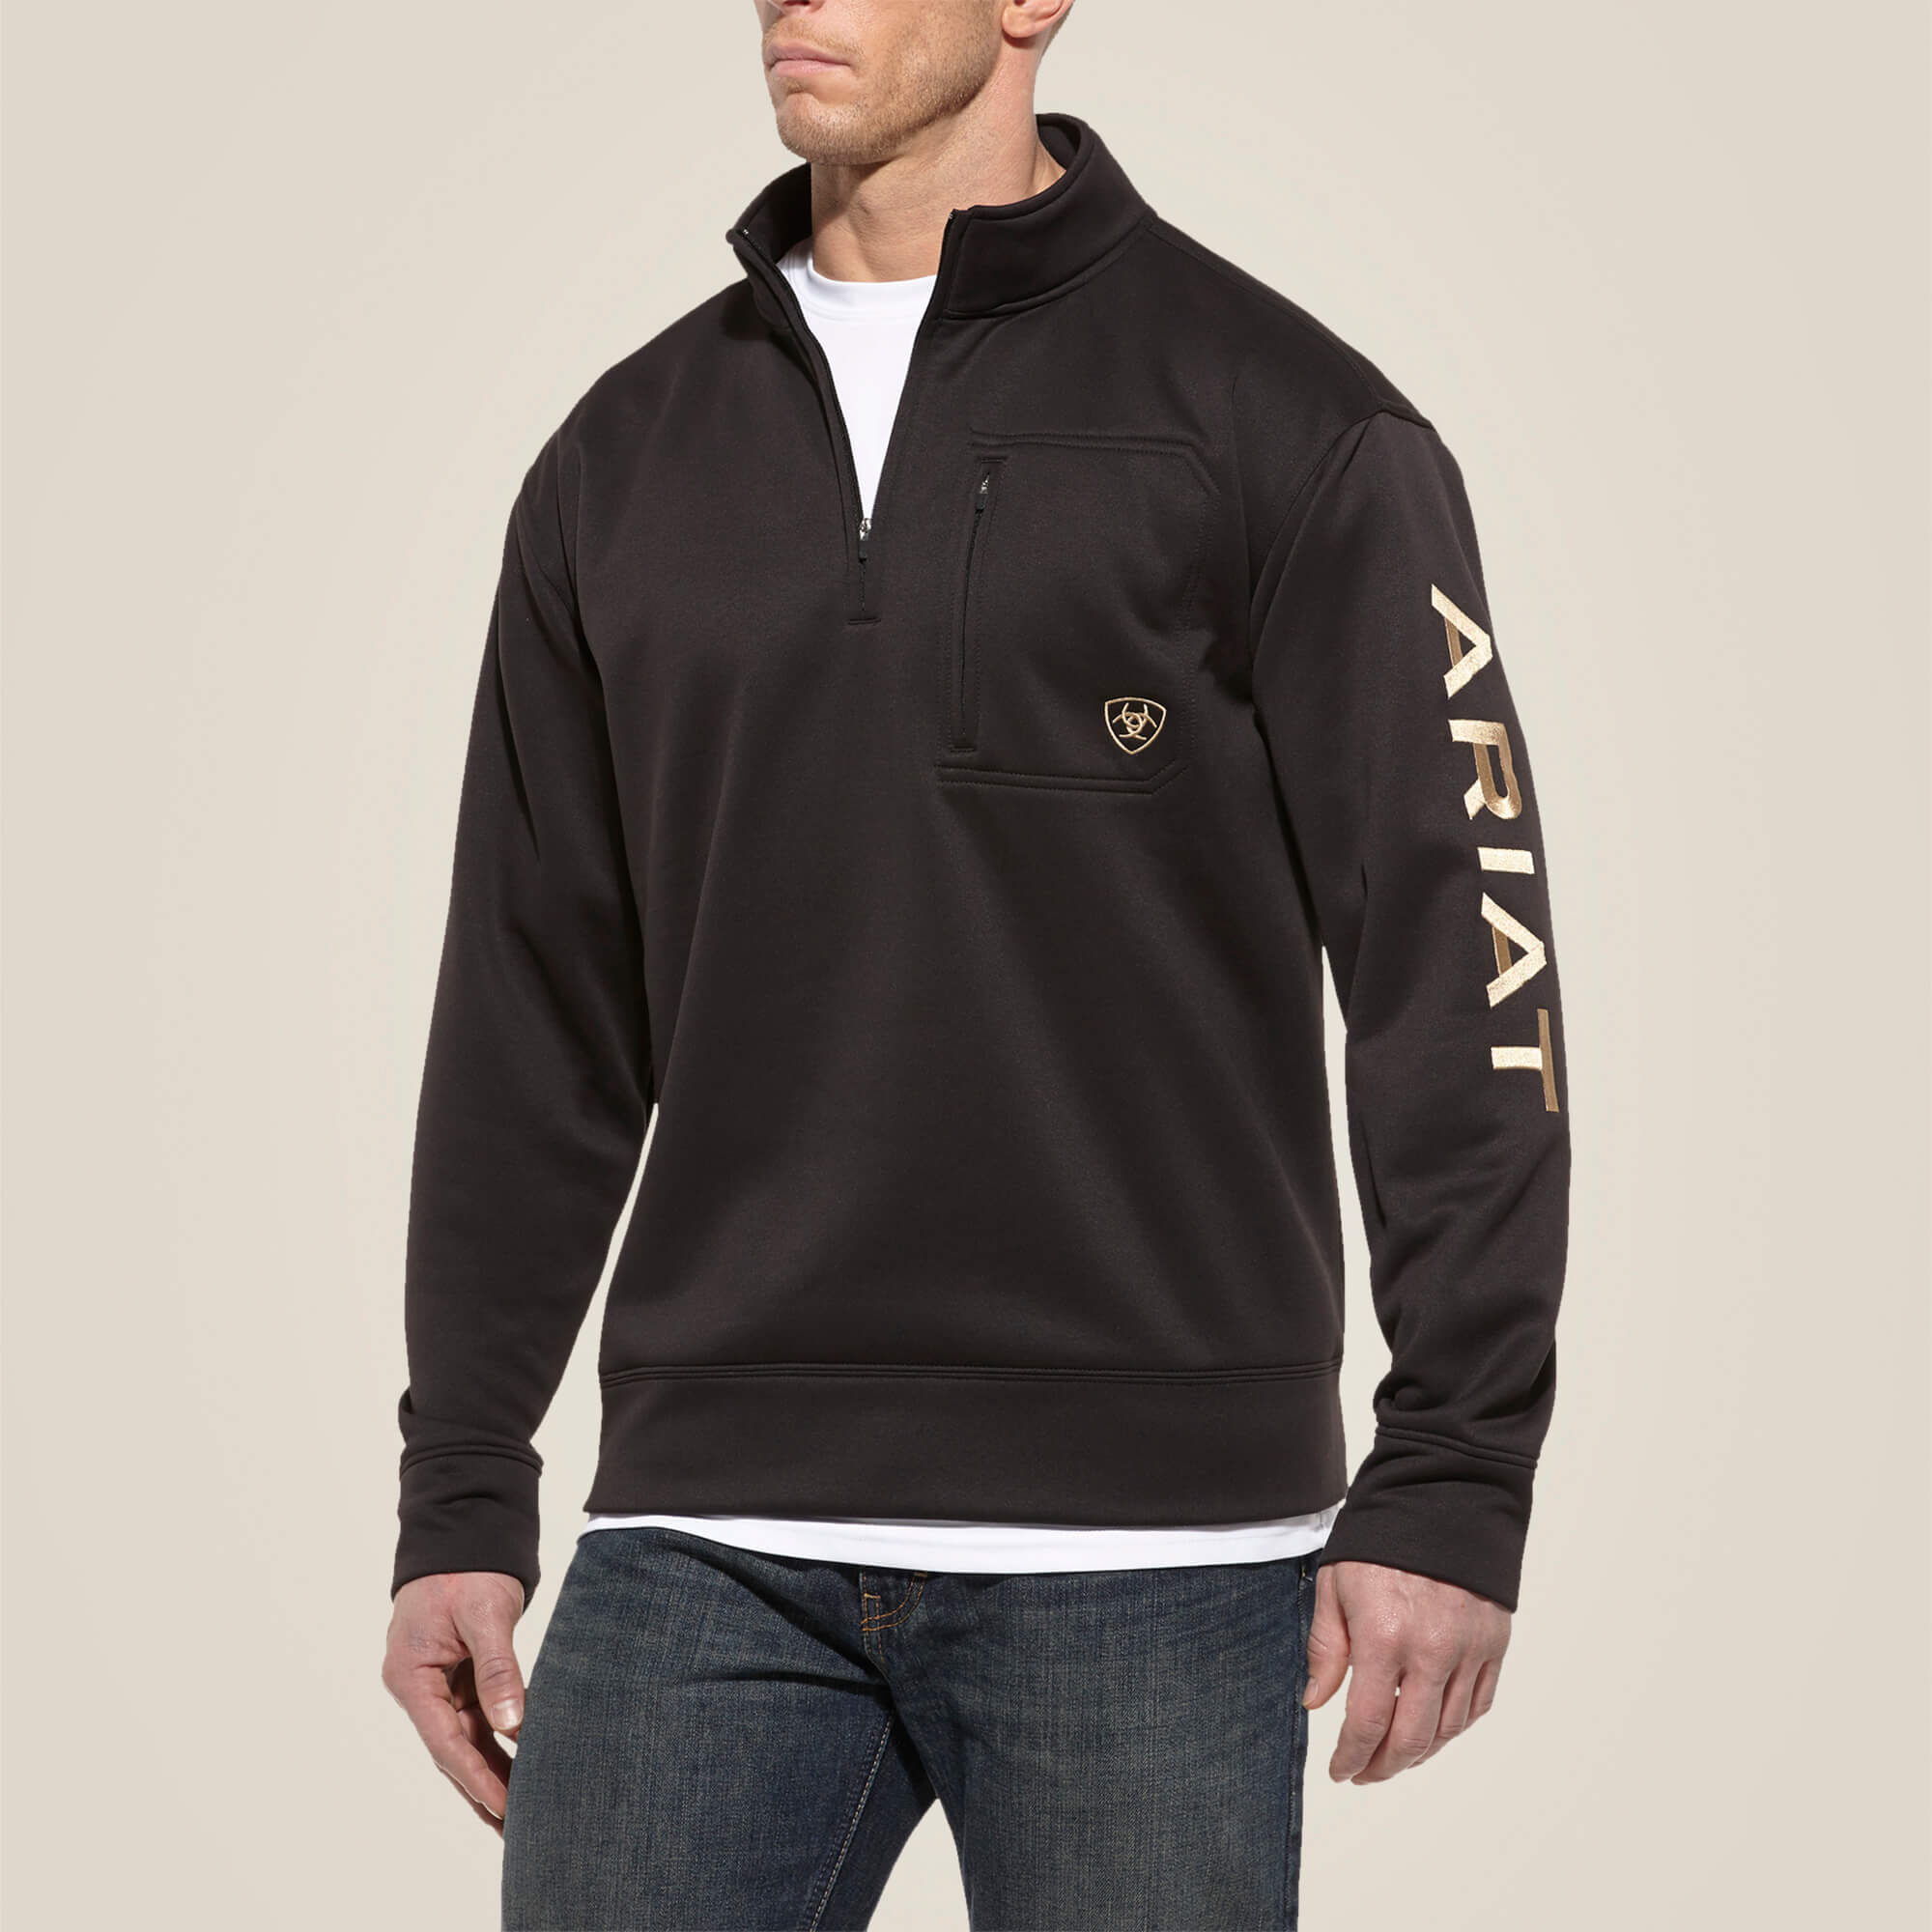 Men's Team Logo 1/4 Zip Top in Black, Size: Small by Ariat